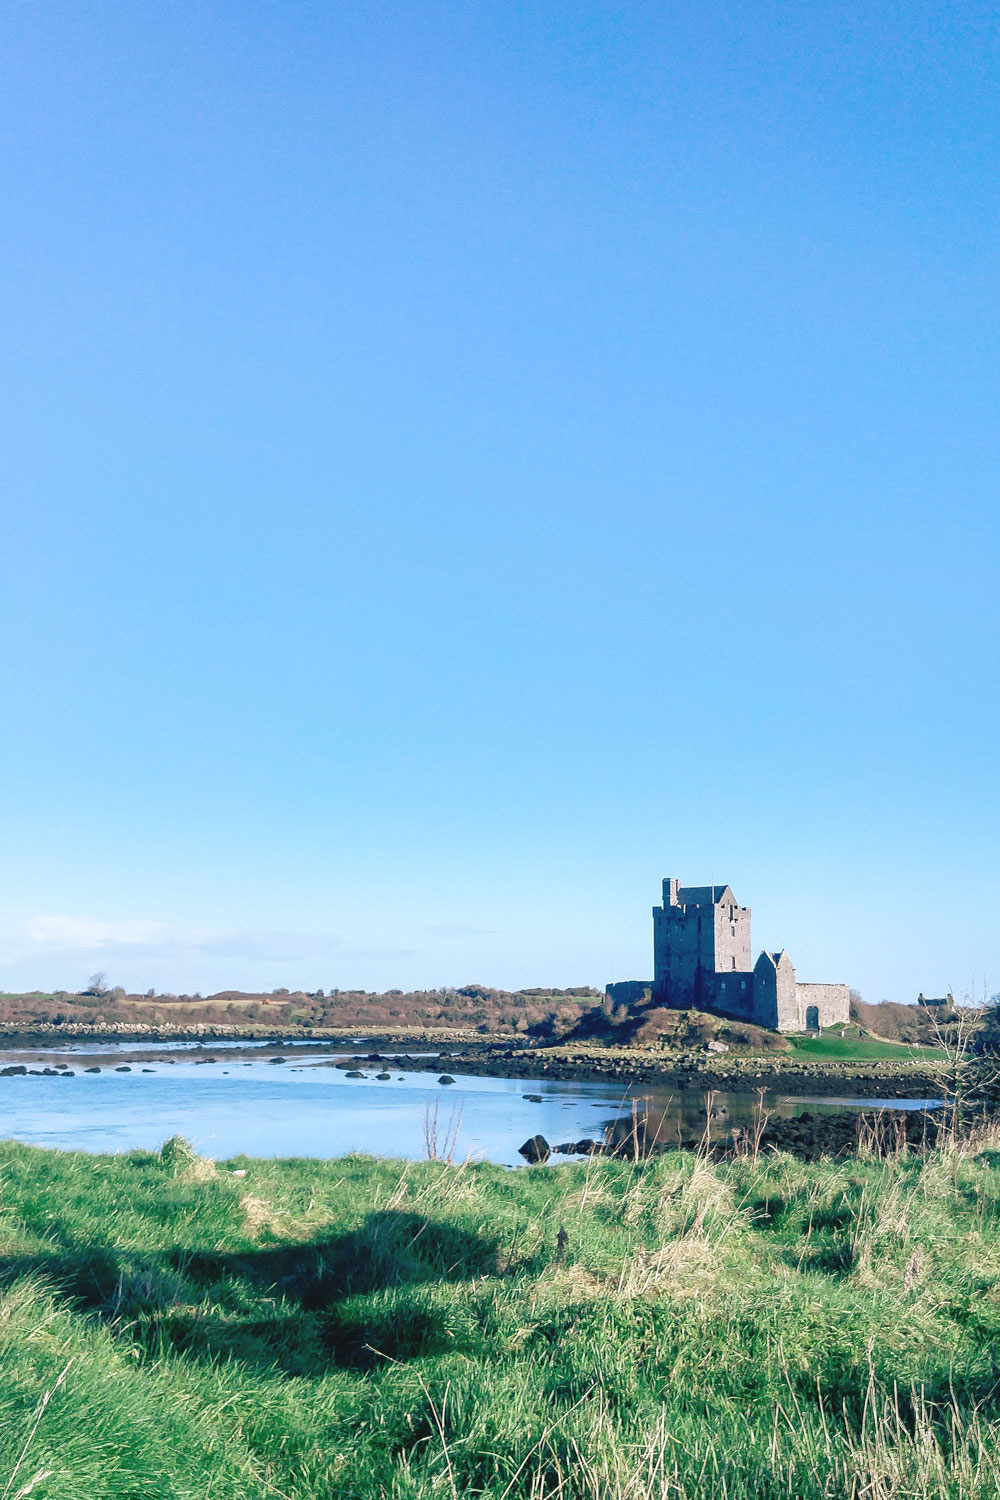 One week itinerary for Ireland, Galway, Cork, Dublin, Long Room Library, Trinity College, Ring of Kerry, Galway bay, What to see in Killarney, Dunguaire Castle, Cliffs of Moher, What to see in Dublin, What to see in Cork by To Vogue or Bust